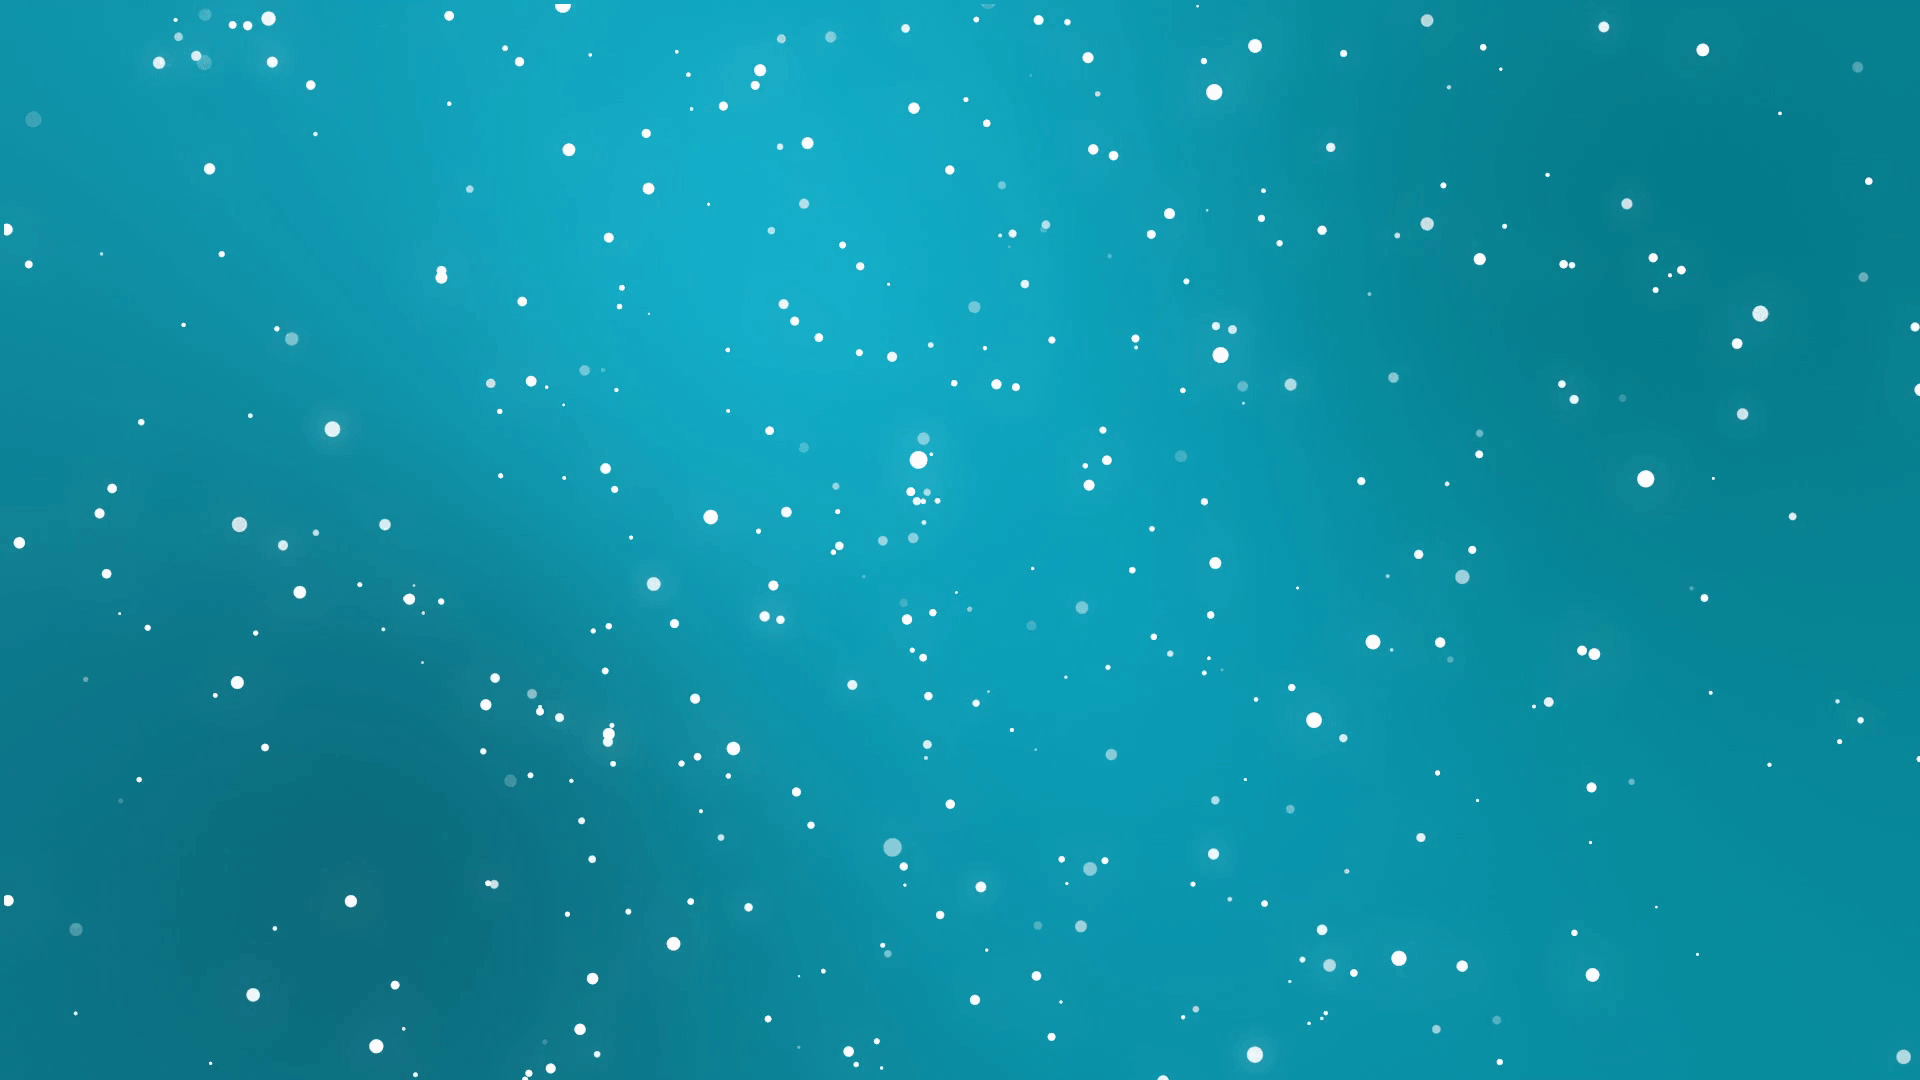 Beautiful festive green teal glitter background with flickering